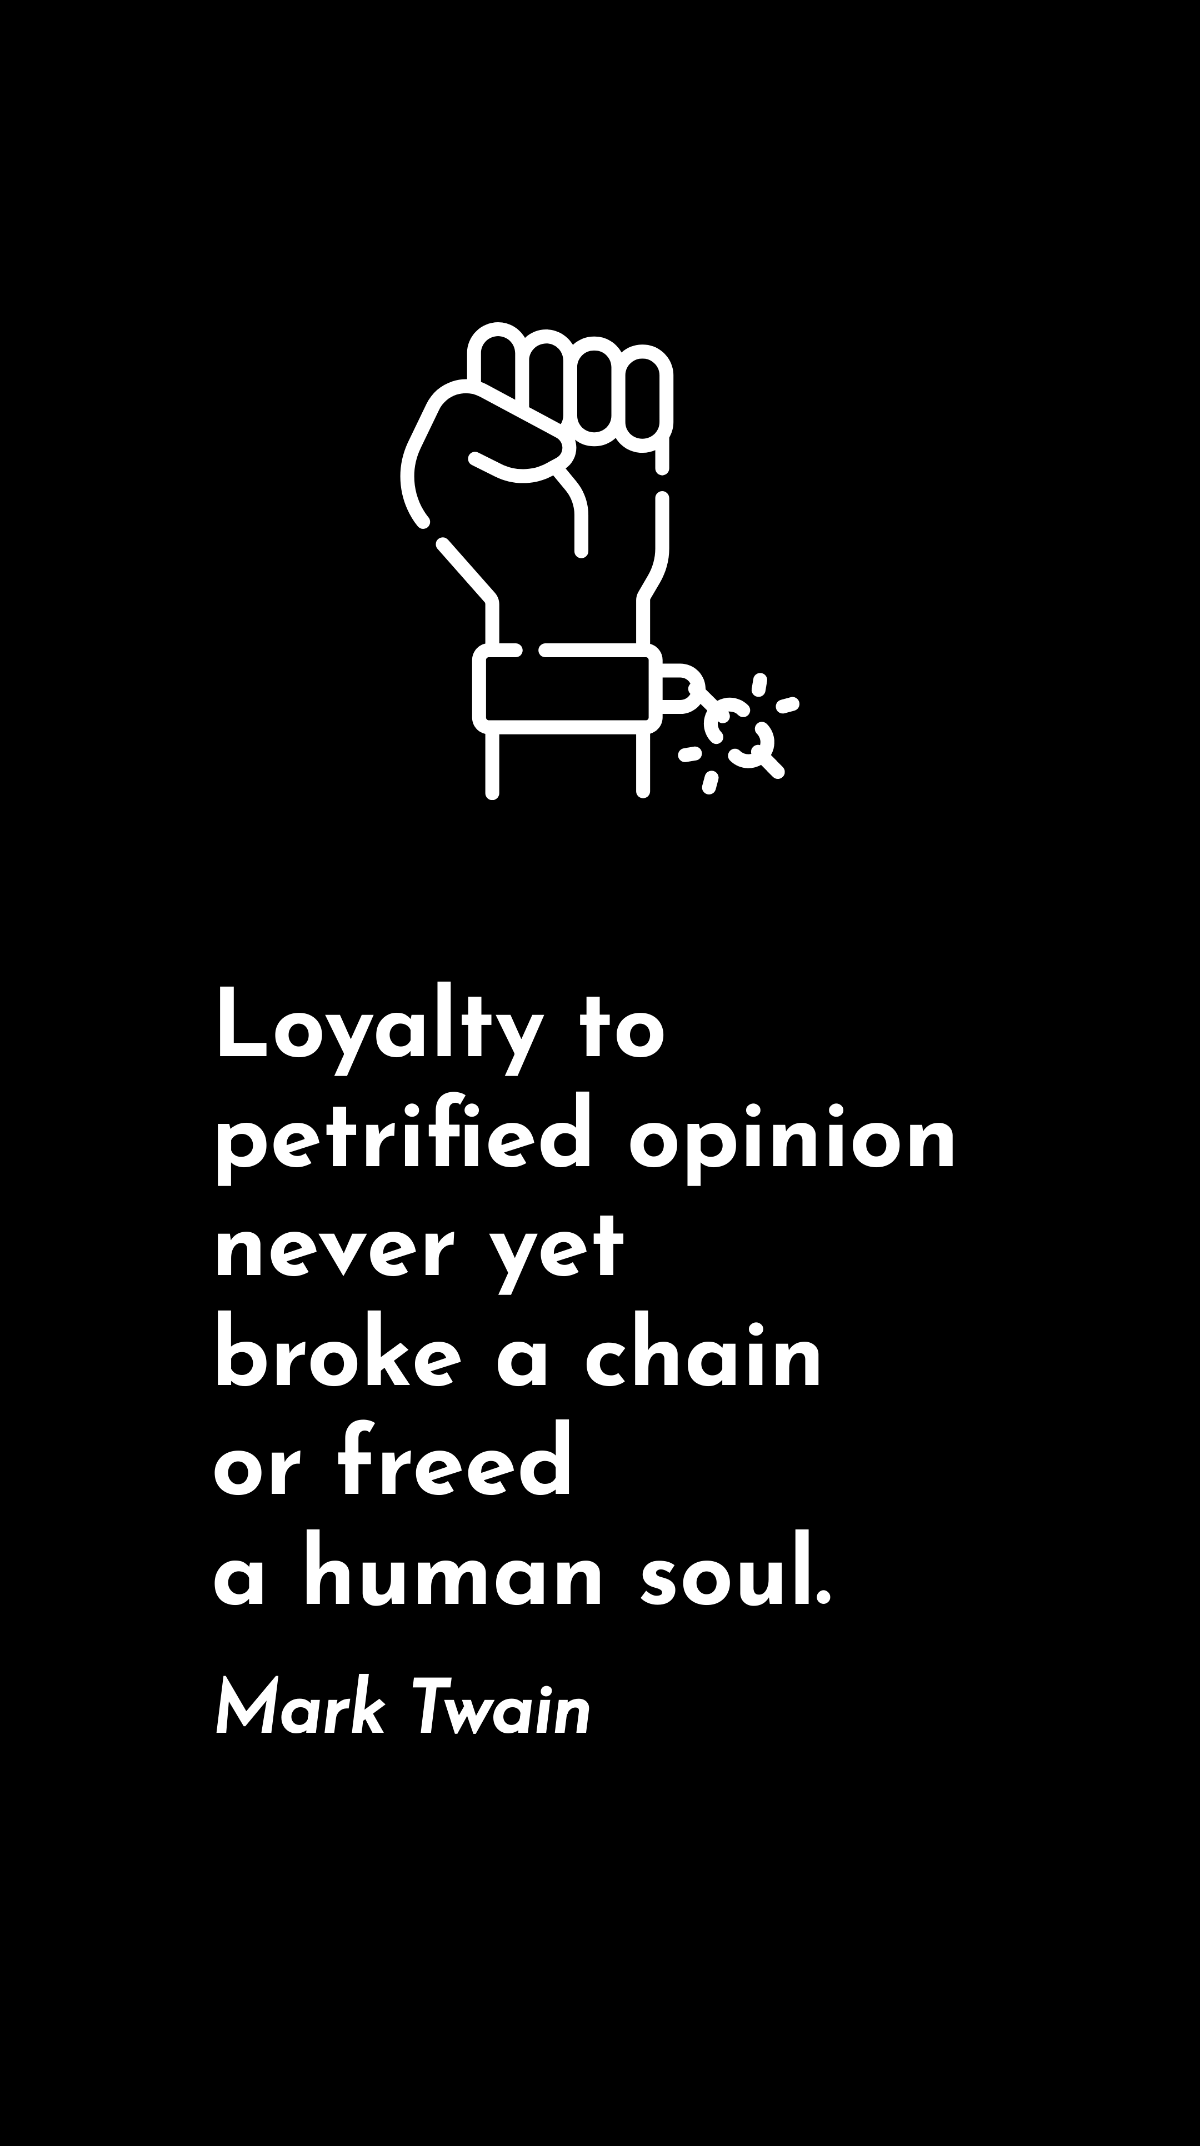 Mark Twain - Loyalty to petrified opinion never yet broke a chain or freed a human soul. Template